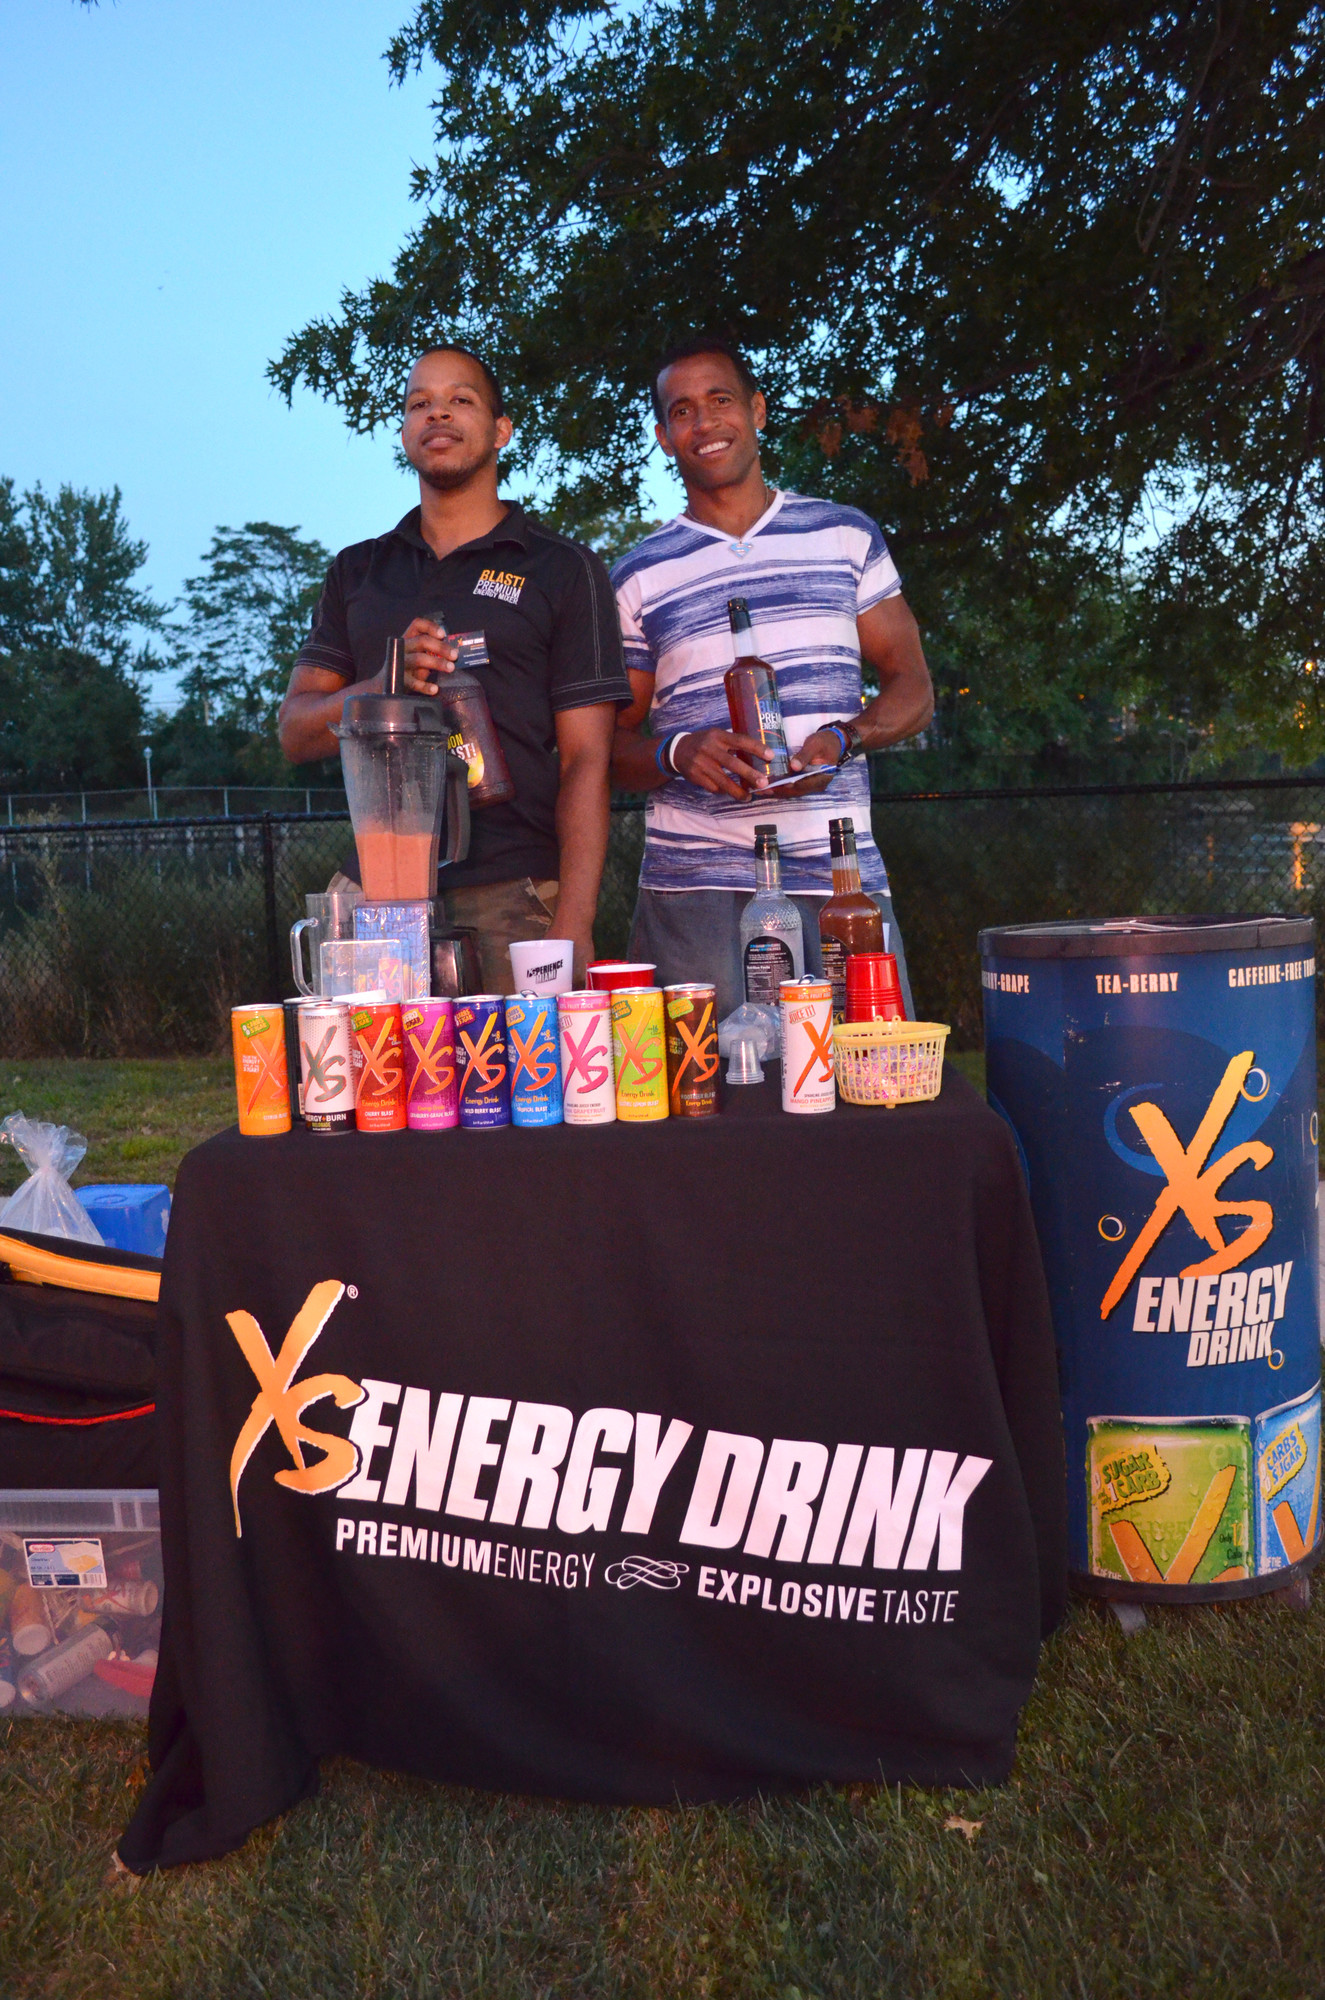 XS Energy Drink workers Justin Callender and Pershod Snuggs.